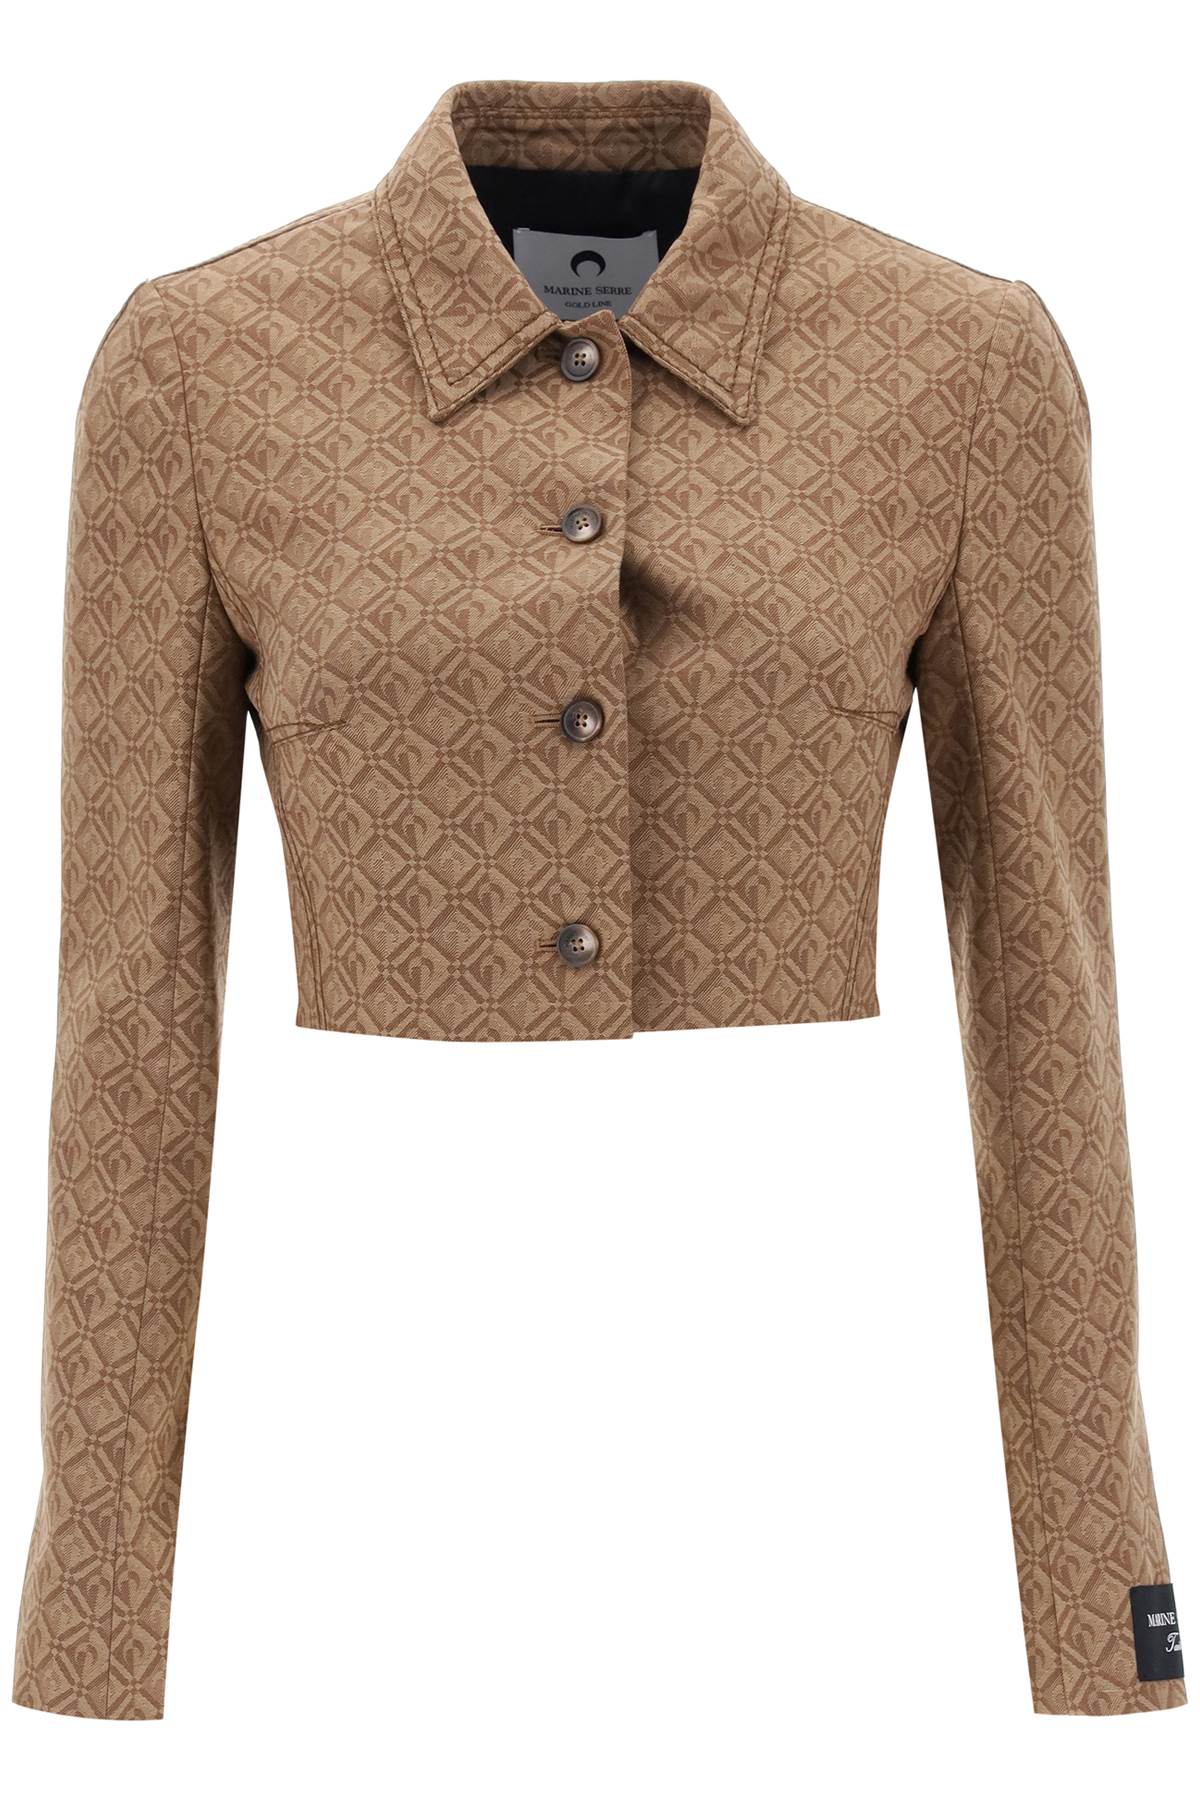 MARINE SERRE Feminine and Chic Cropped Jacket with Exquisite Moon Diamant Pattern